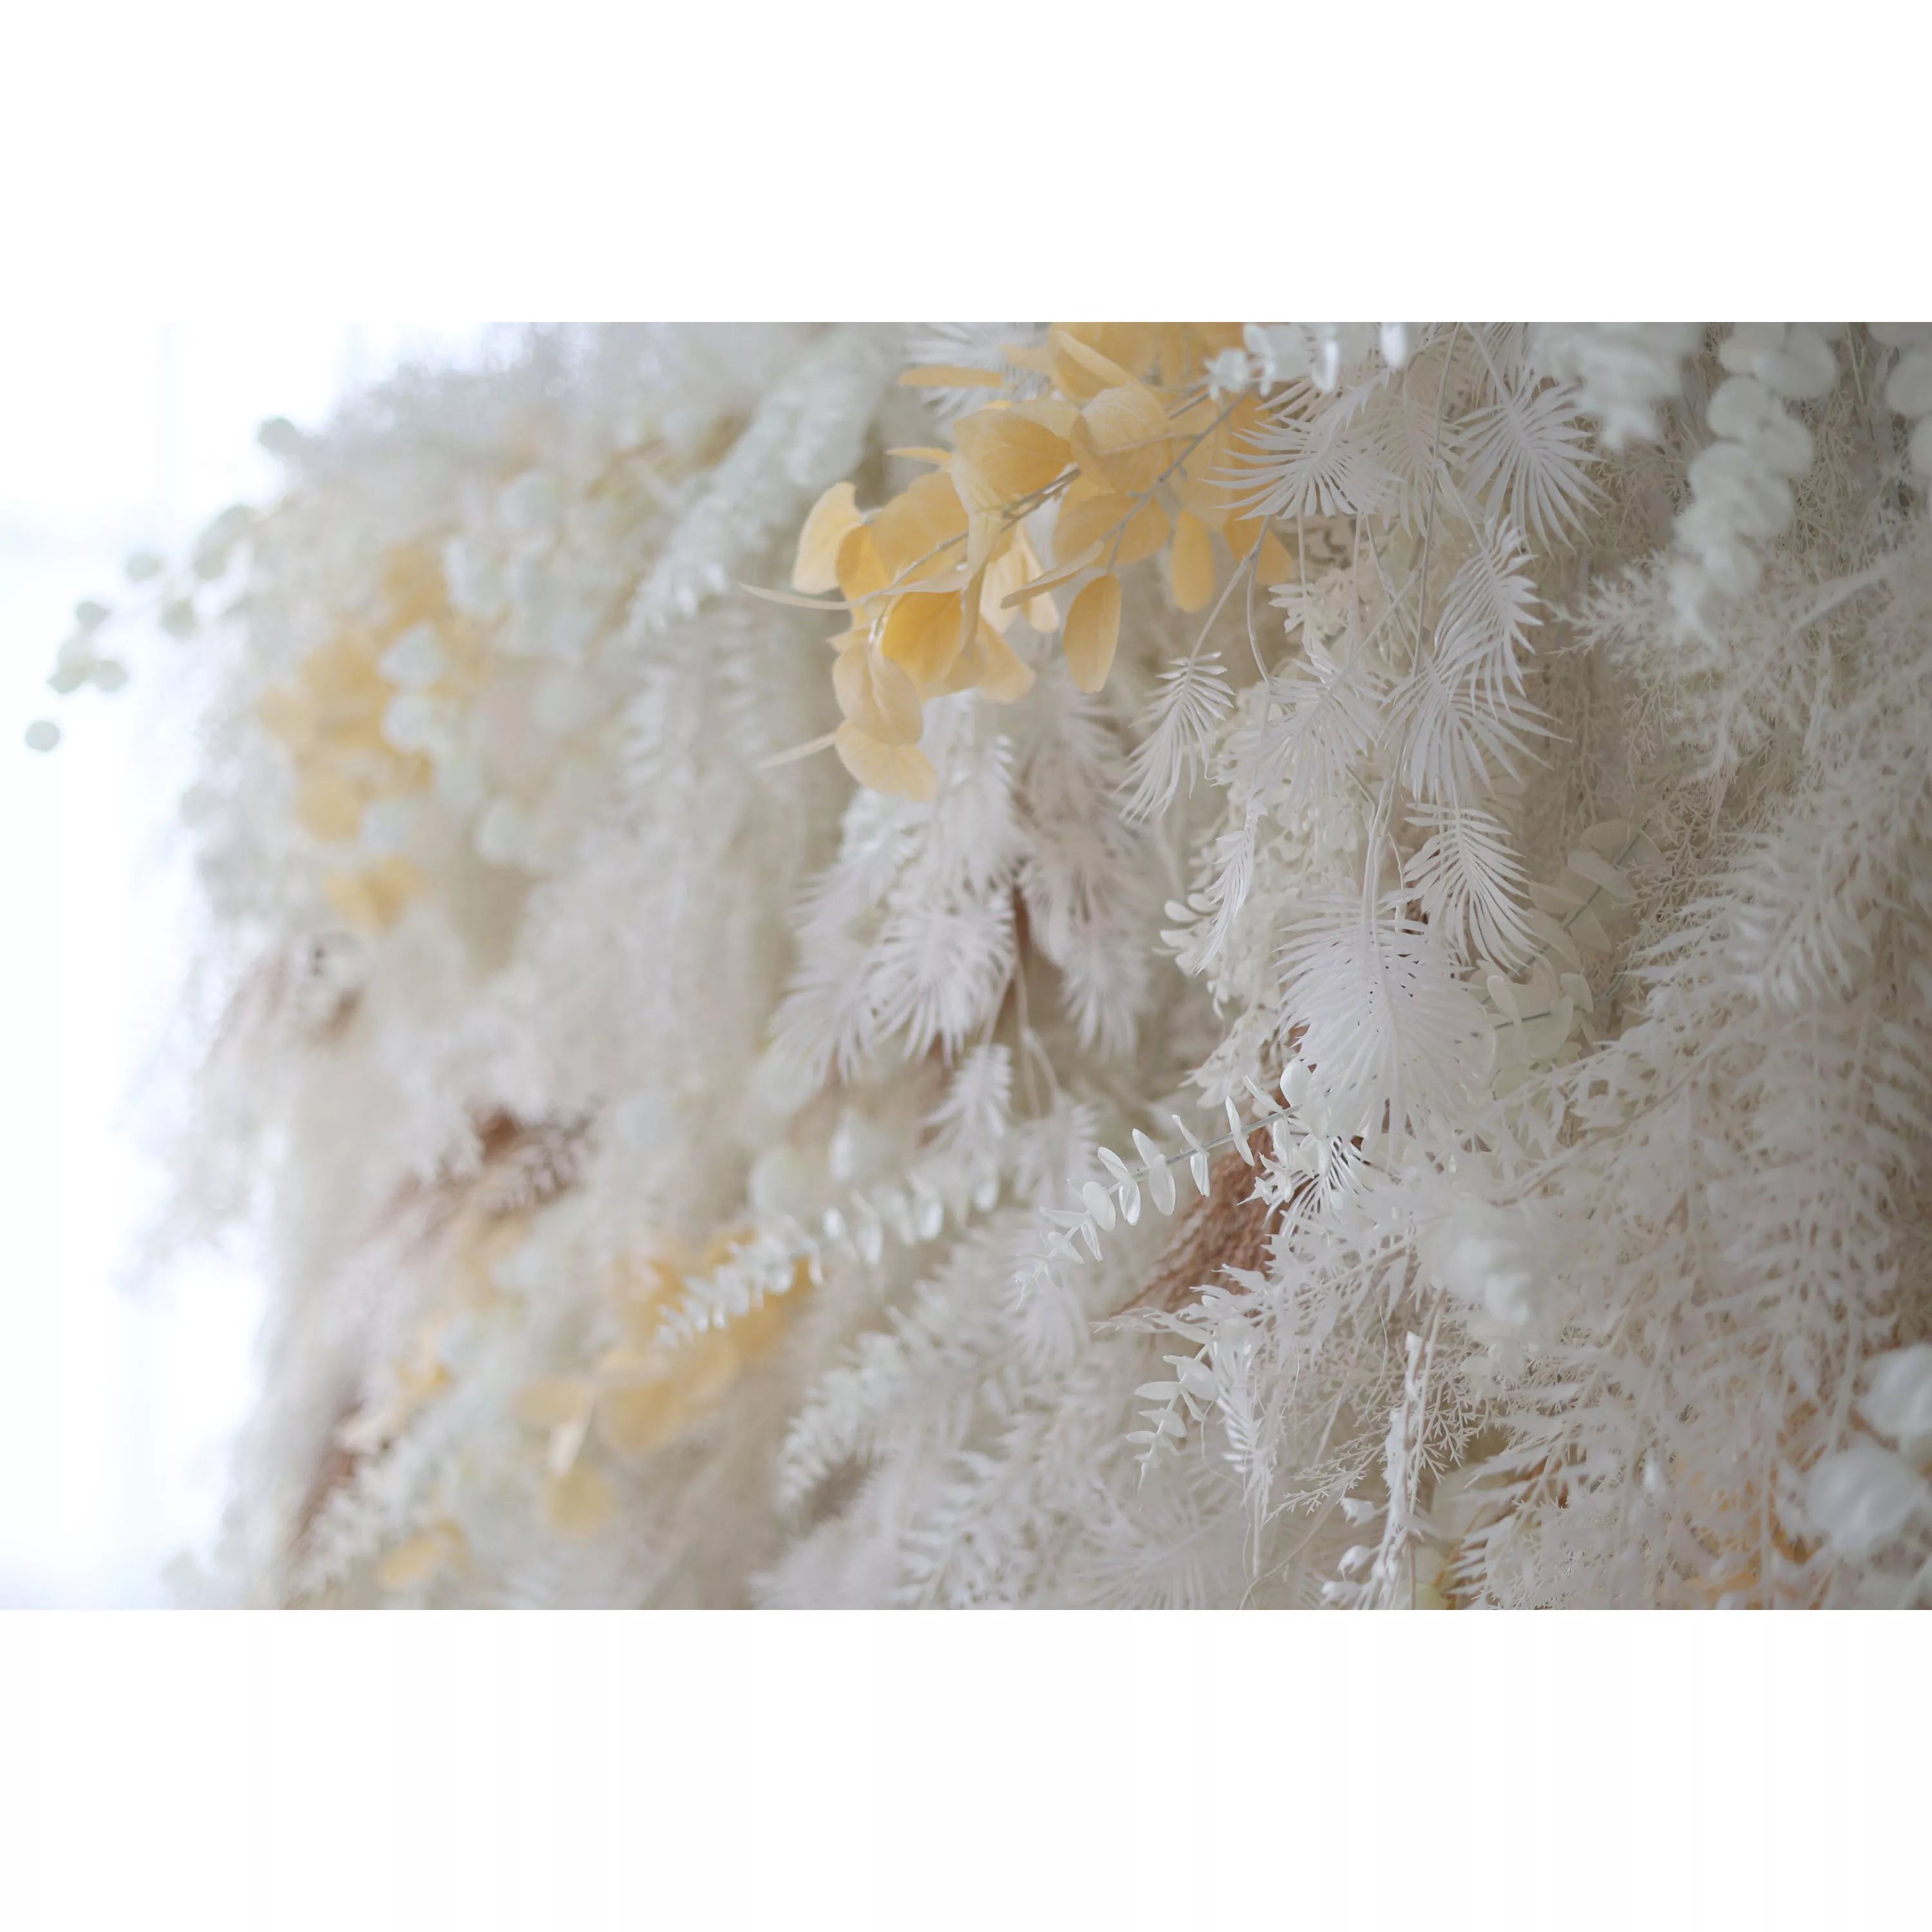 Valar Flower Unveils: The Enchanted Snowscape – A Majestic Artificial Fabric Flower Wall of Wintry Whites and Golden Blooms-VF-208